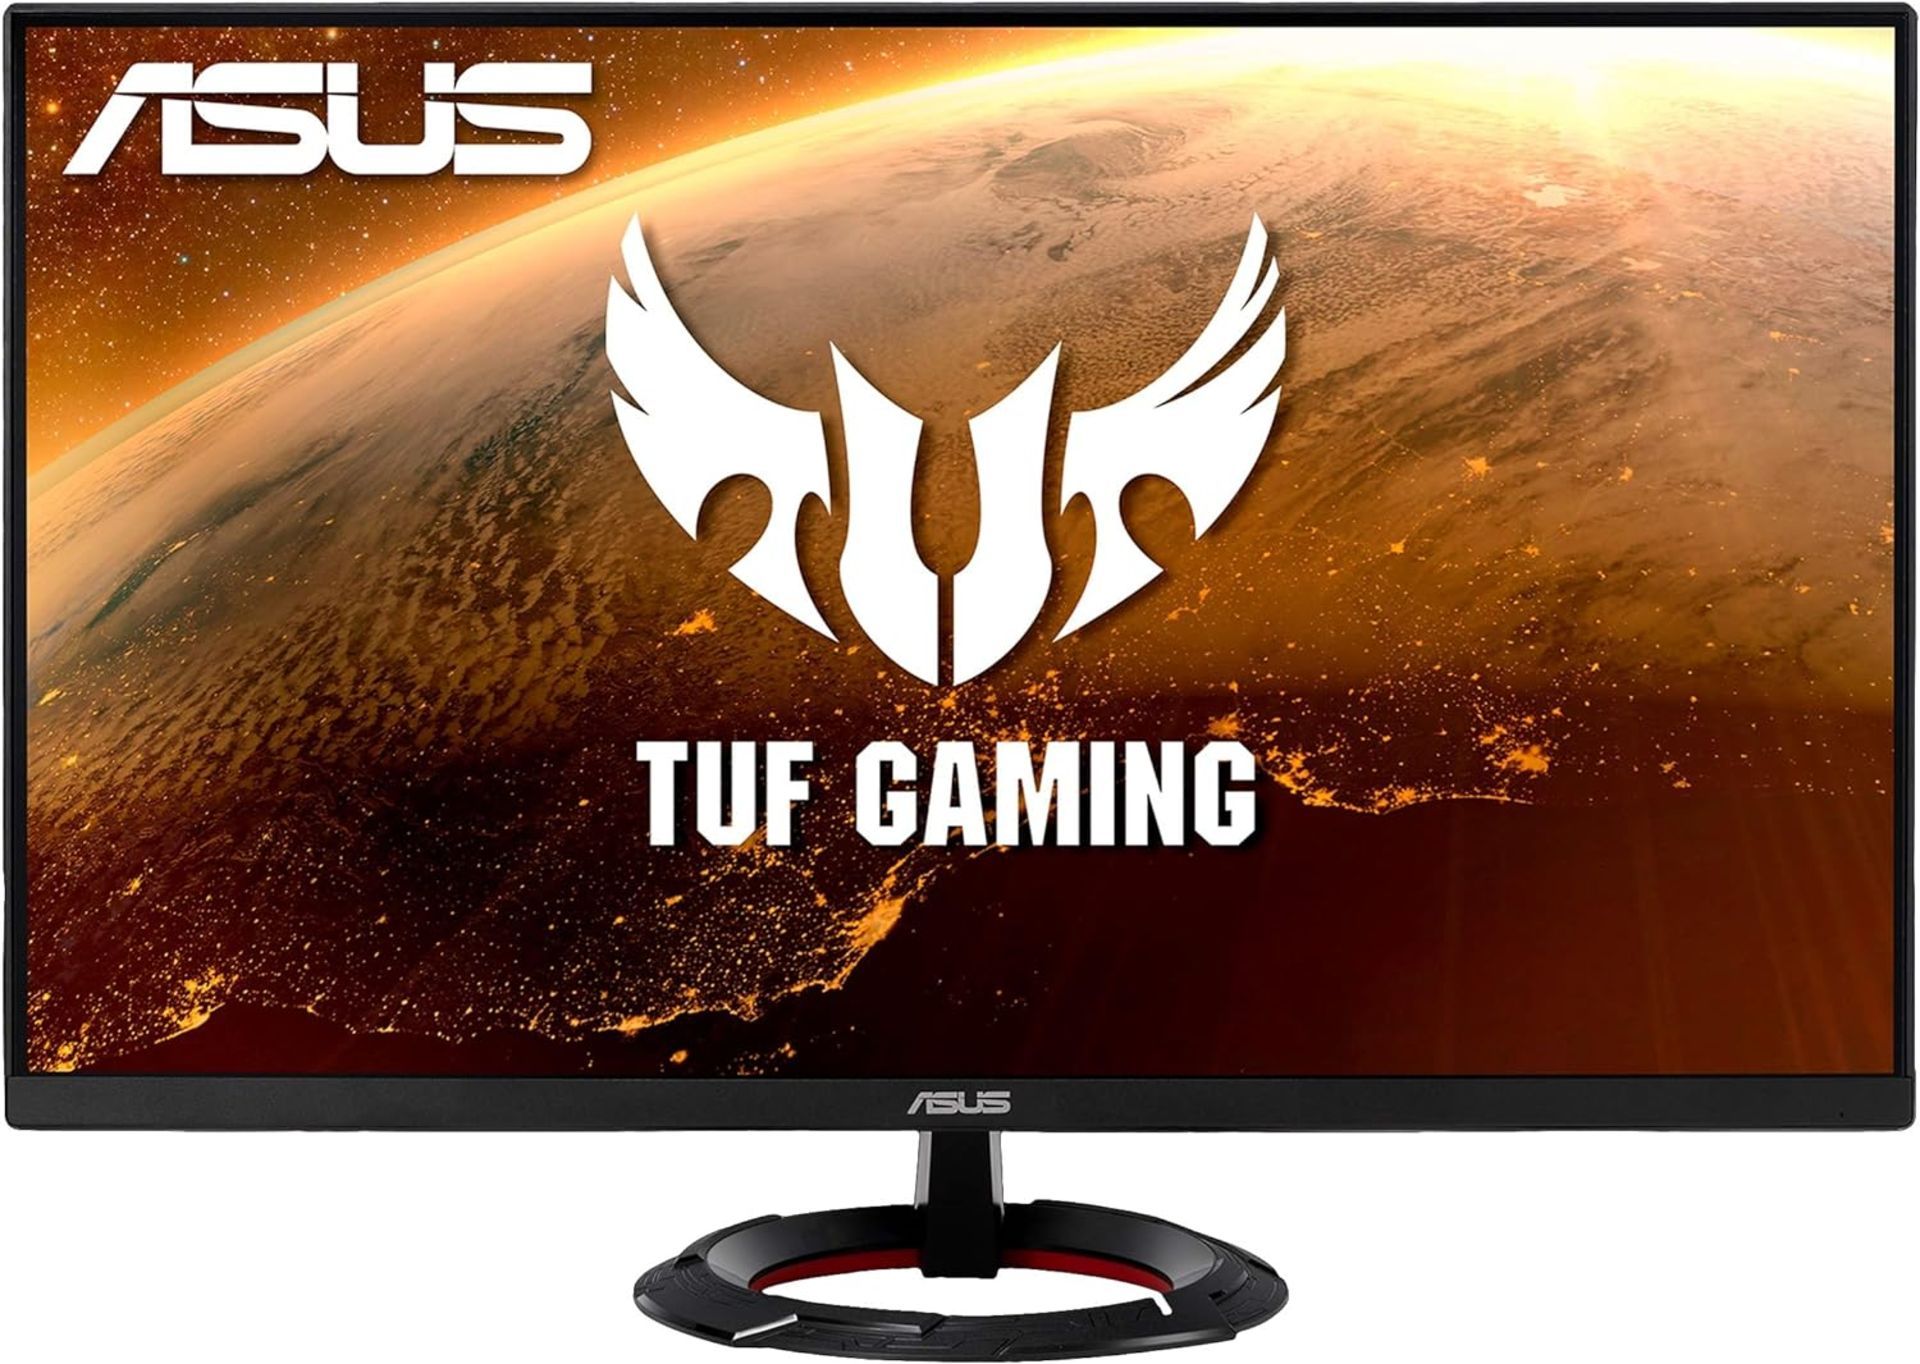 BRAND NEW FACTORY SEALED ASUS TUF VG279Q1R 27 Inch 144hz Gaming Monitor. RRP £249. (PCKBW). 27- - Bild 2 aus 3